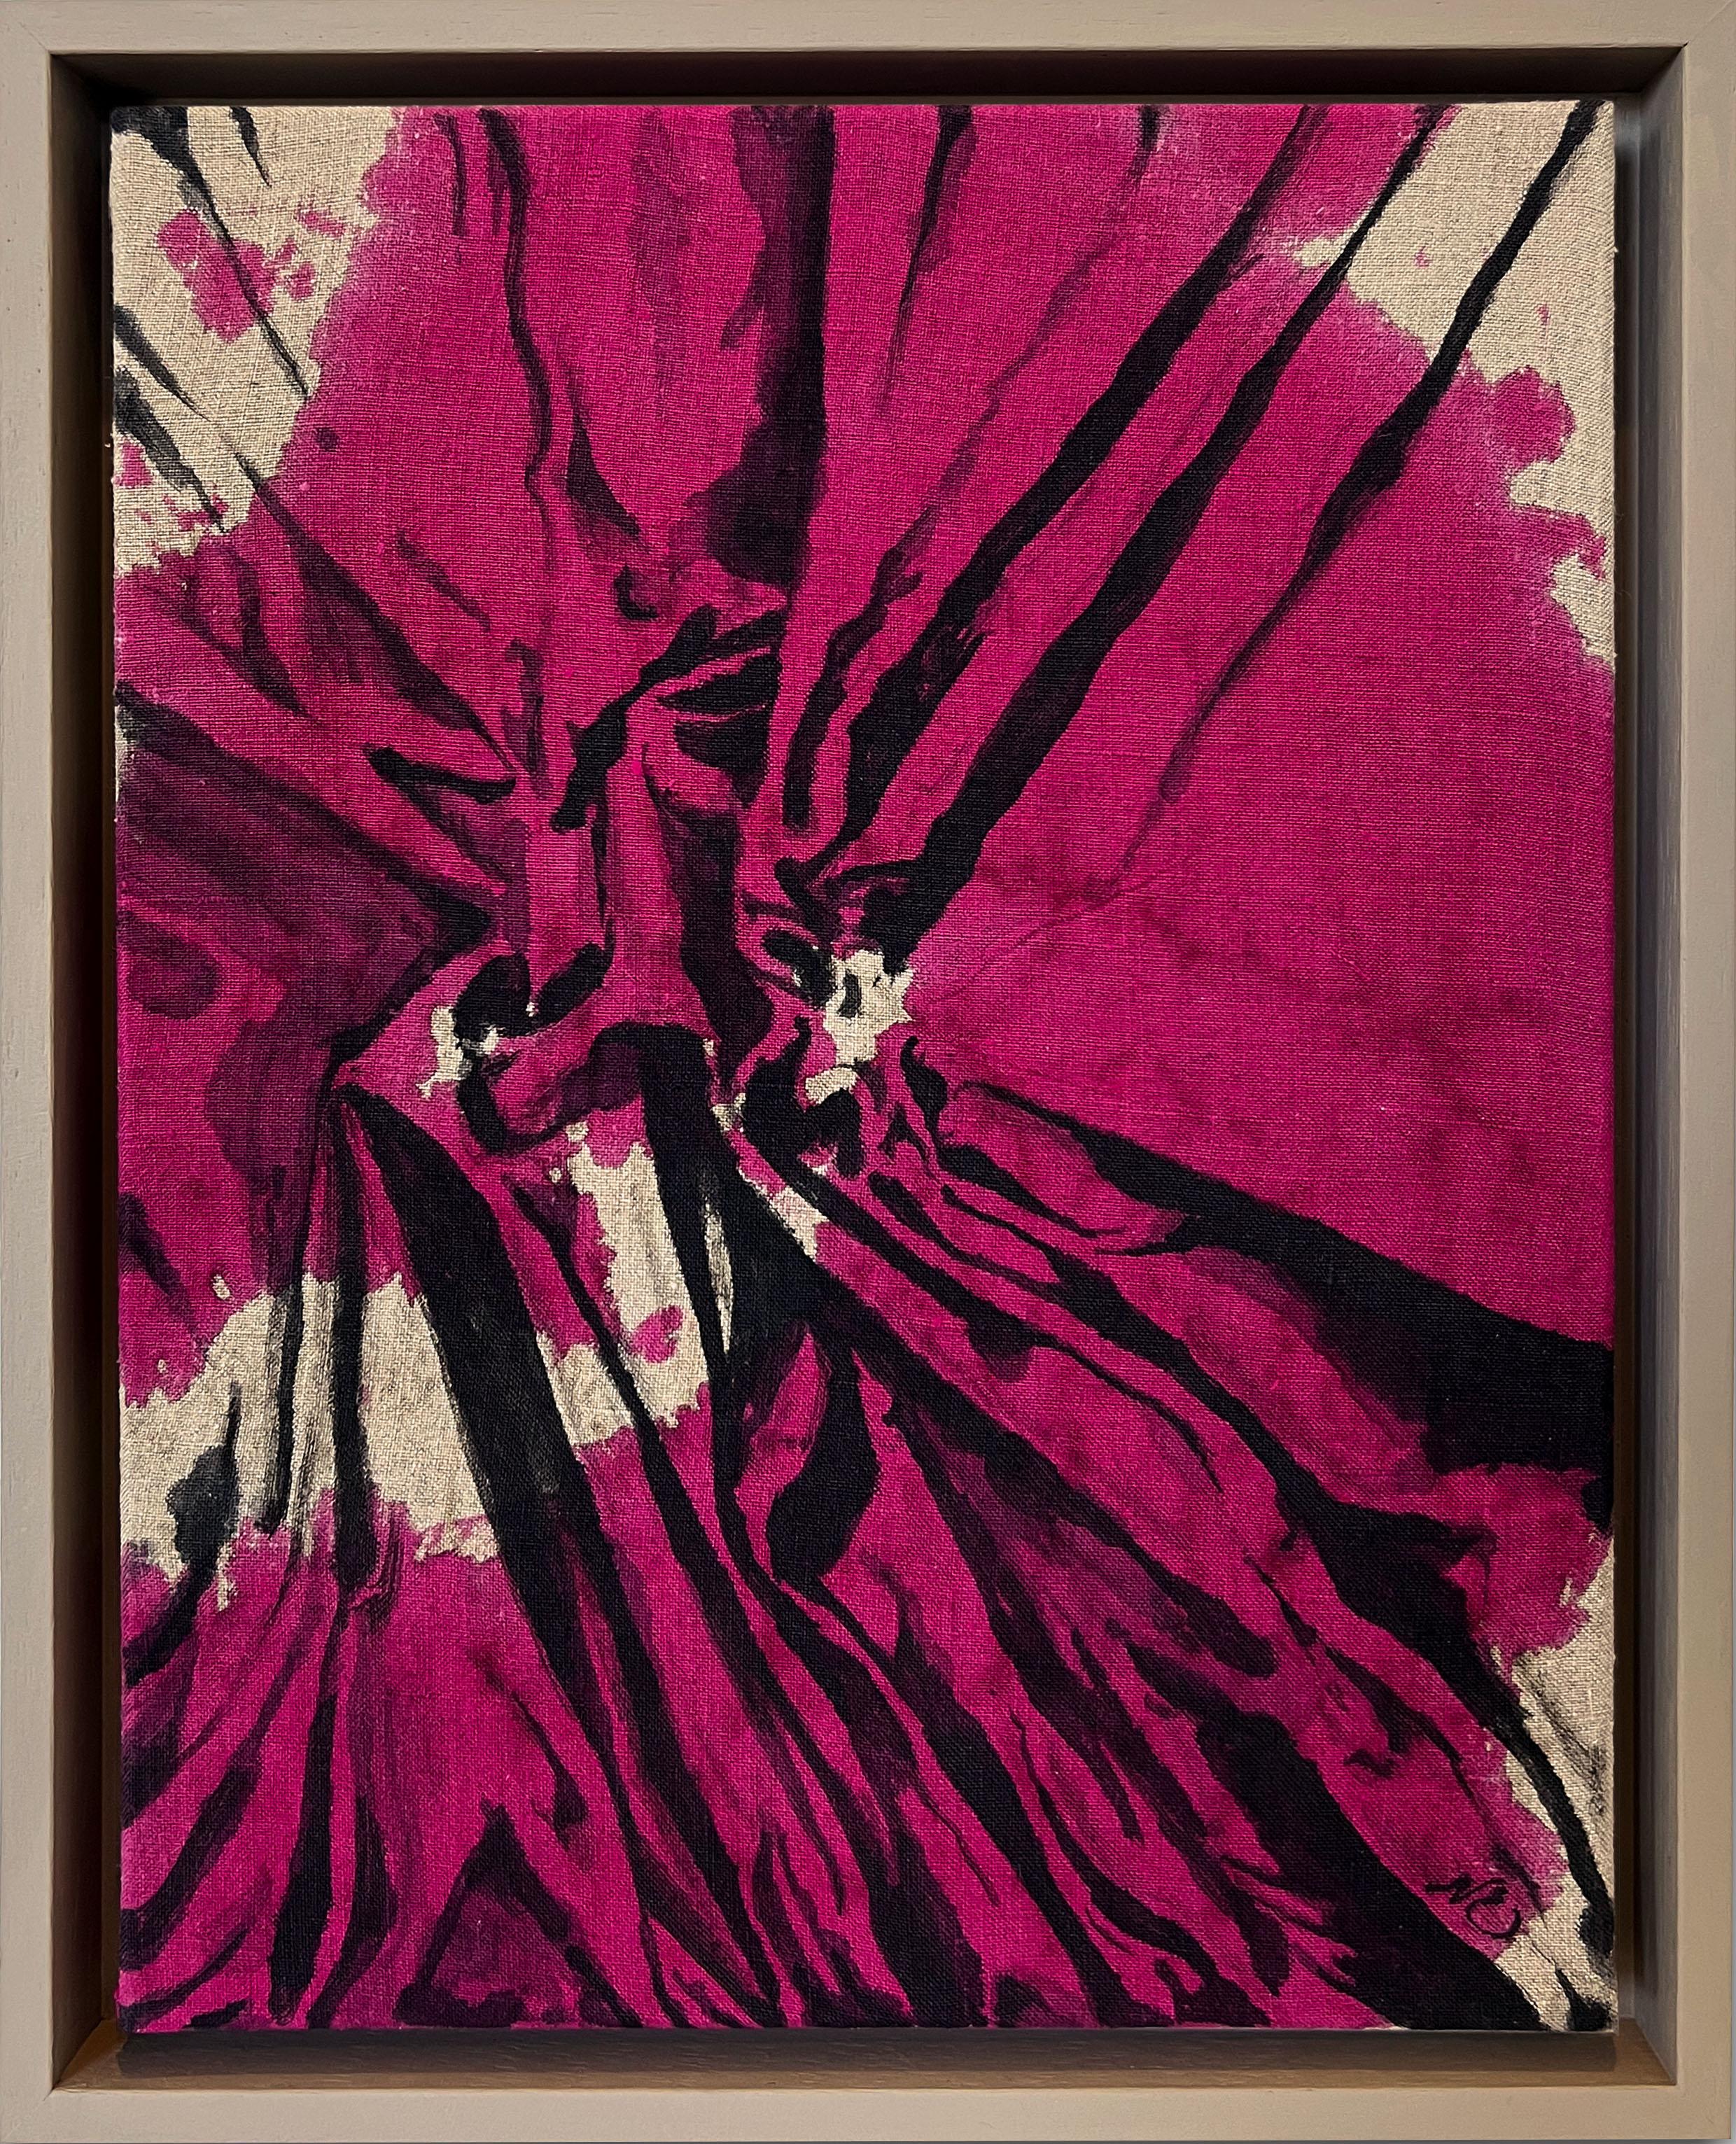 Nicholas Evans Abstract Painting - "Shown the Sheets" (abstract, fuchsia, pink, custom framed painting on linen)